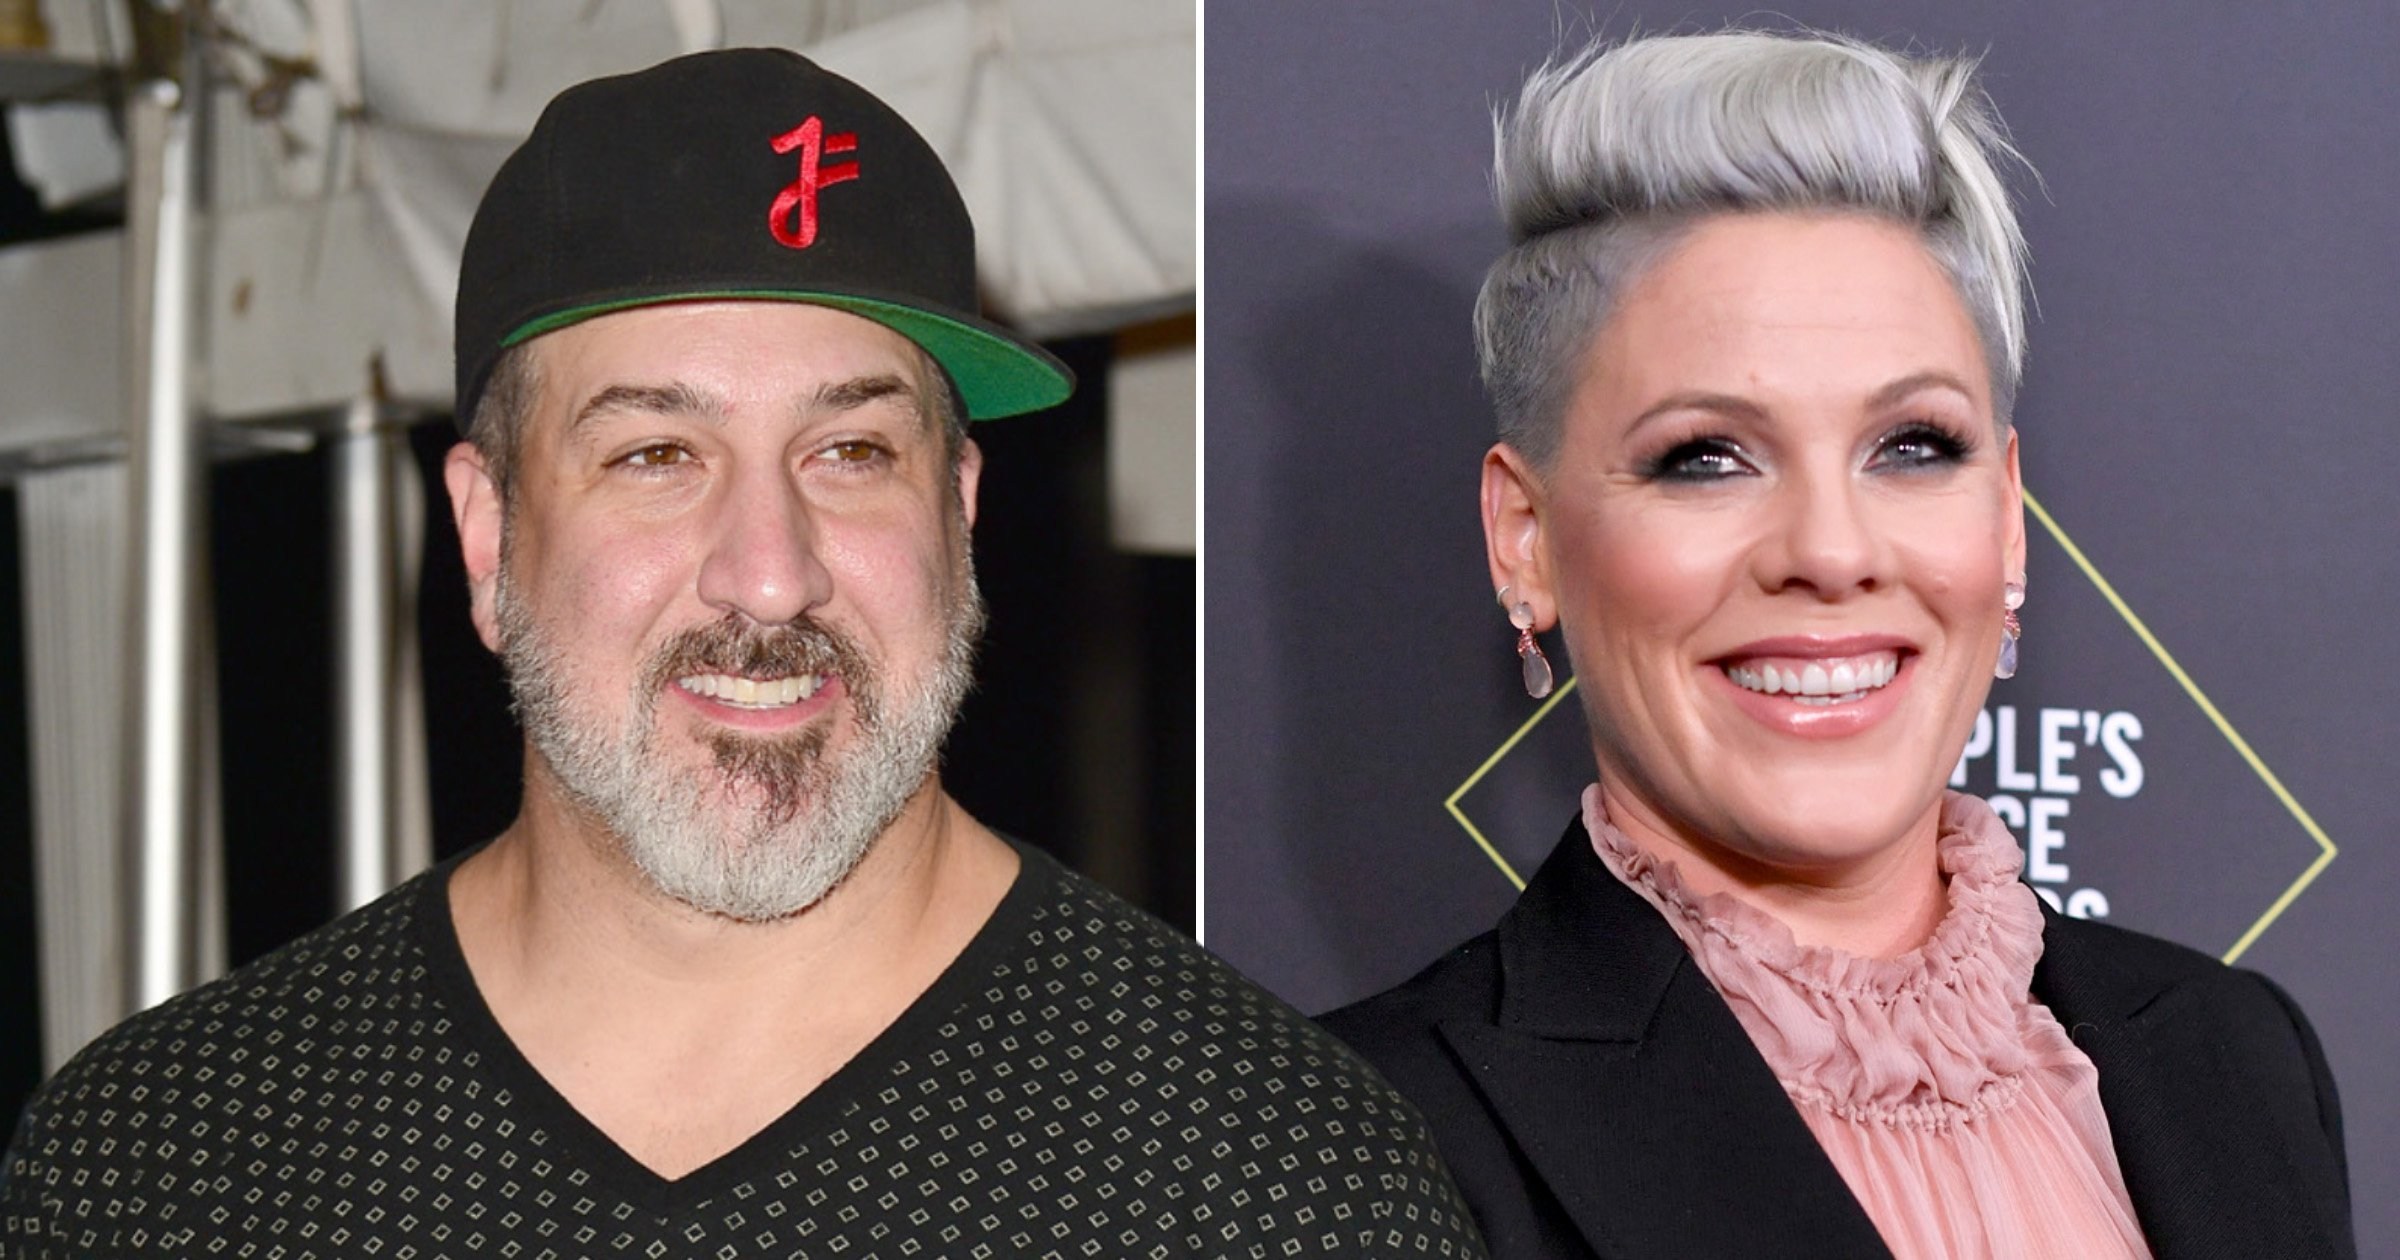 NSYNC’s Joey Fatone firmly friend-zoned by Pink back in the day: ‘I guess I wasn’t her type’